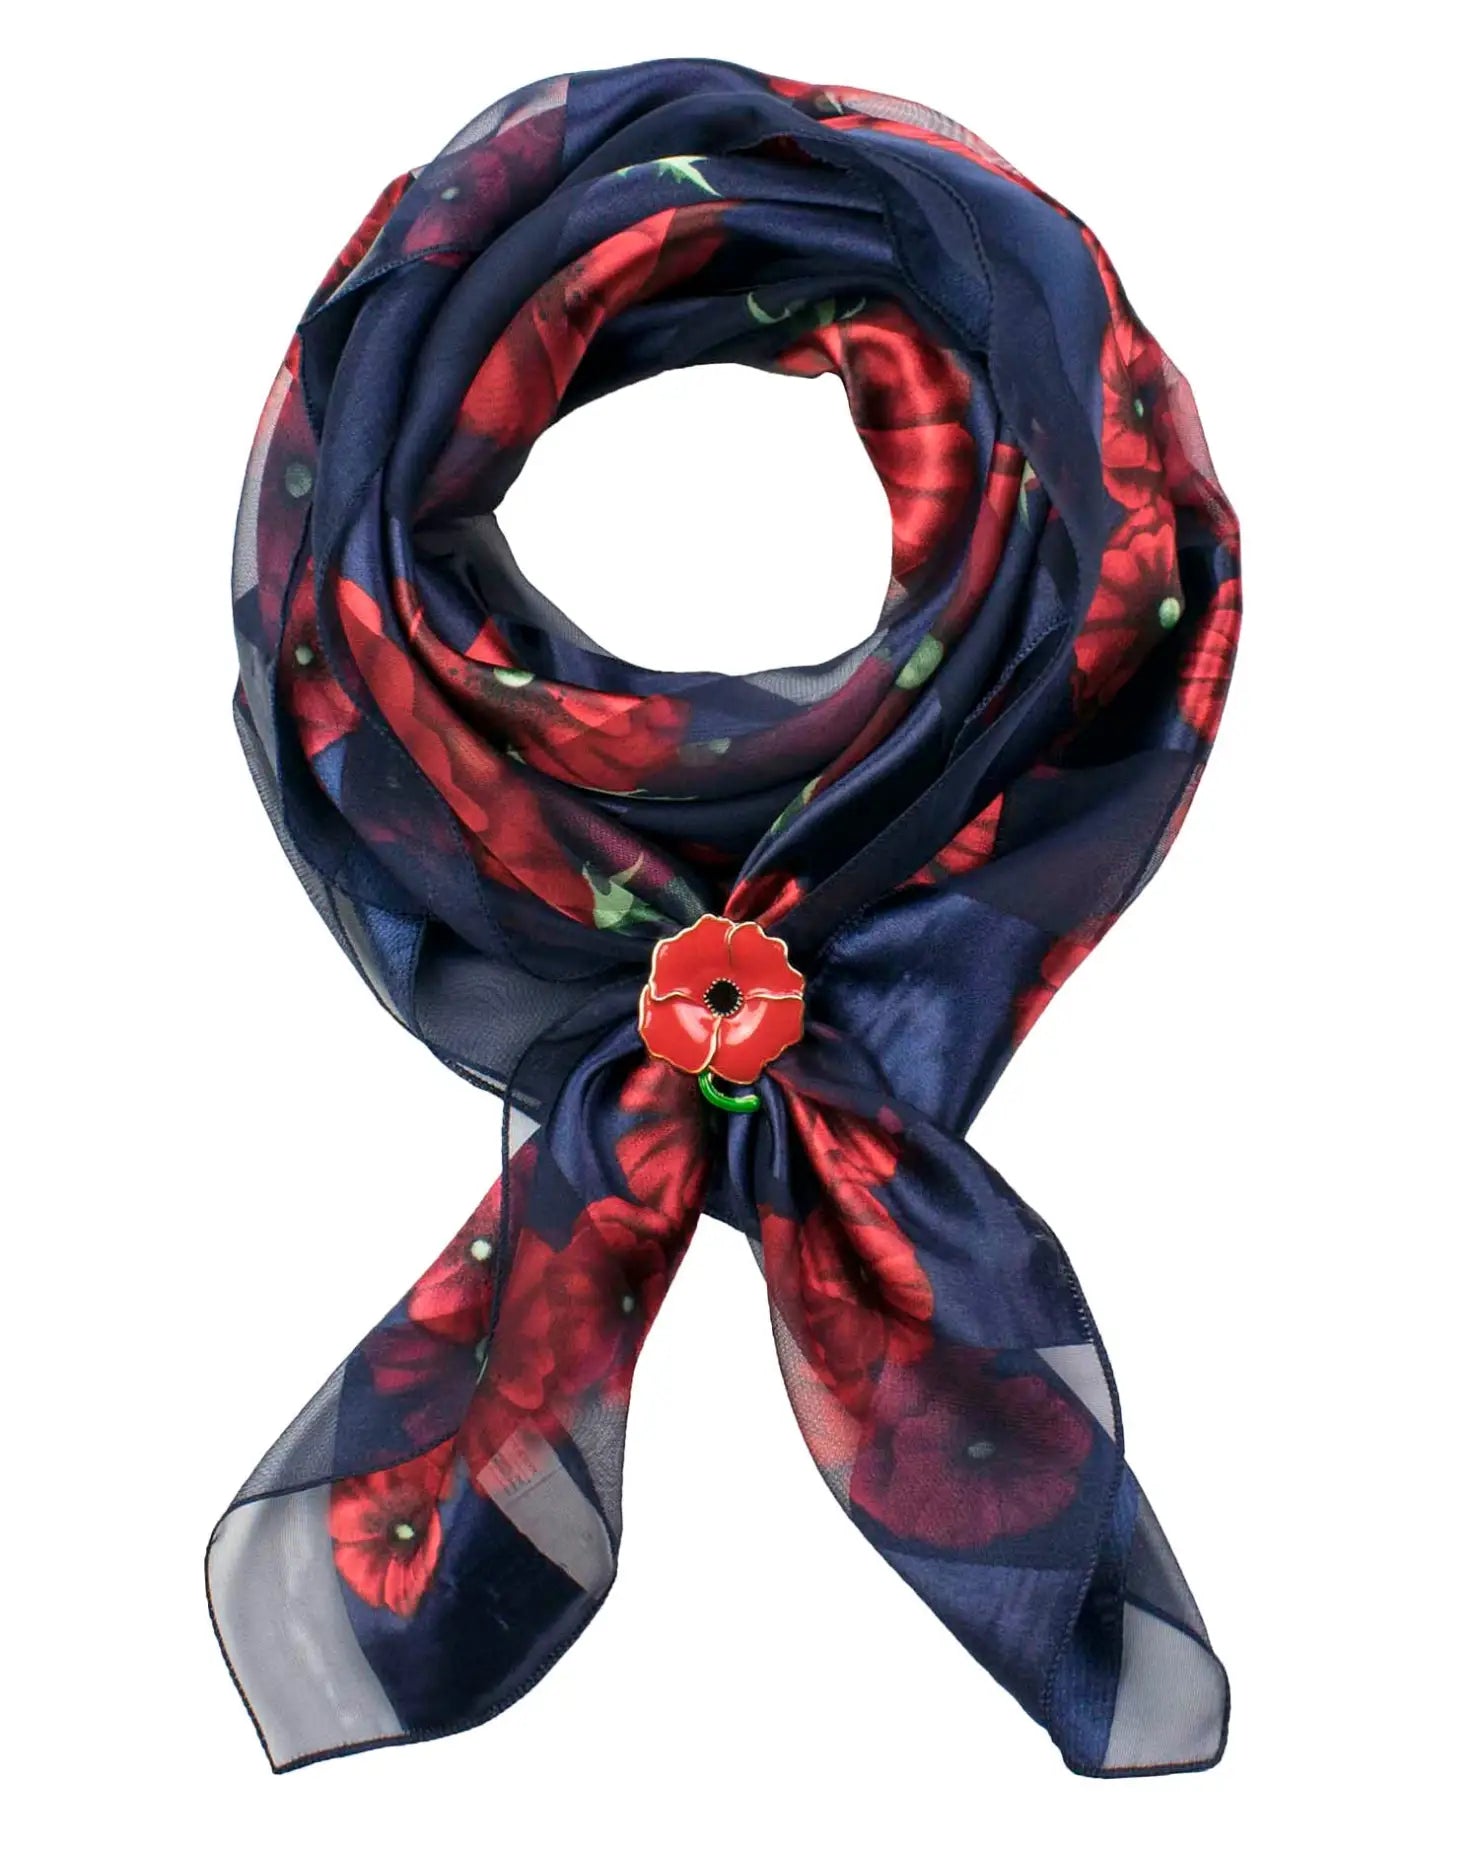 Large Square Poppy Scarf with Red Flower Design